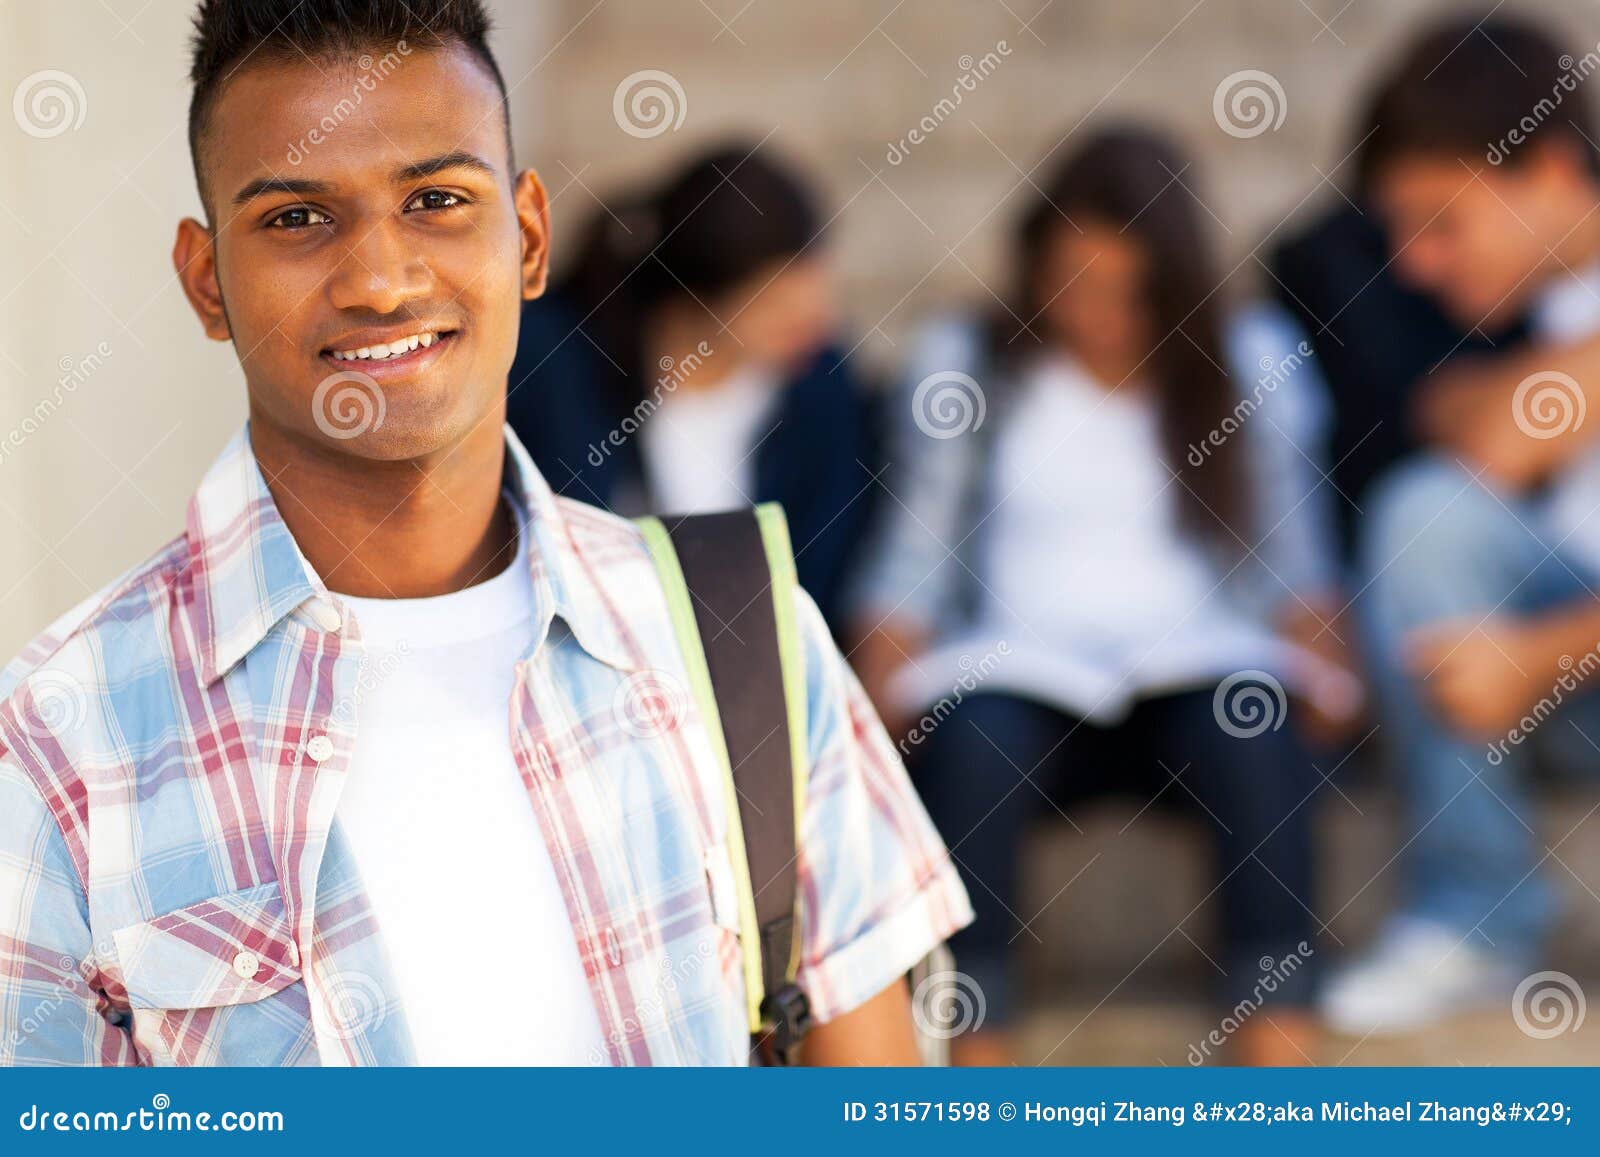 Profile of a Teenage Indian Boy Looking at outsides Stock Photo